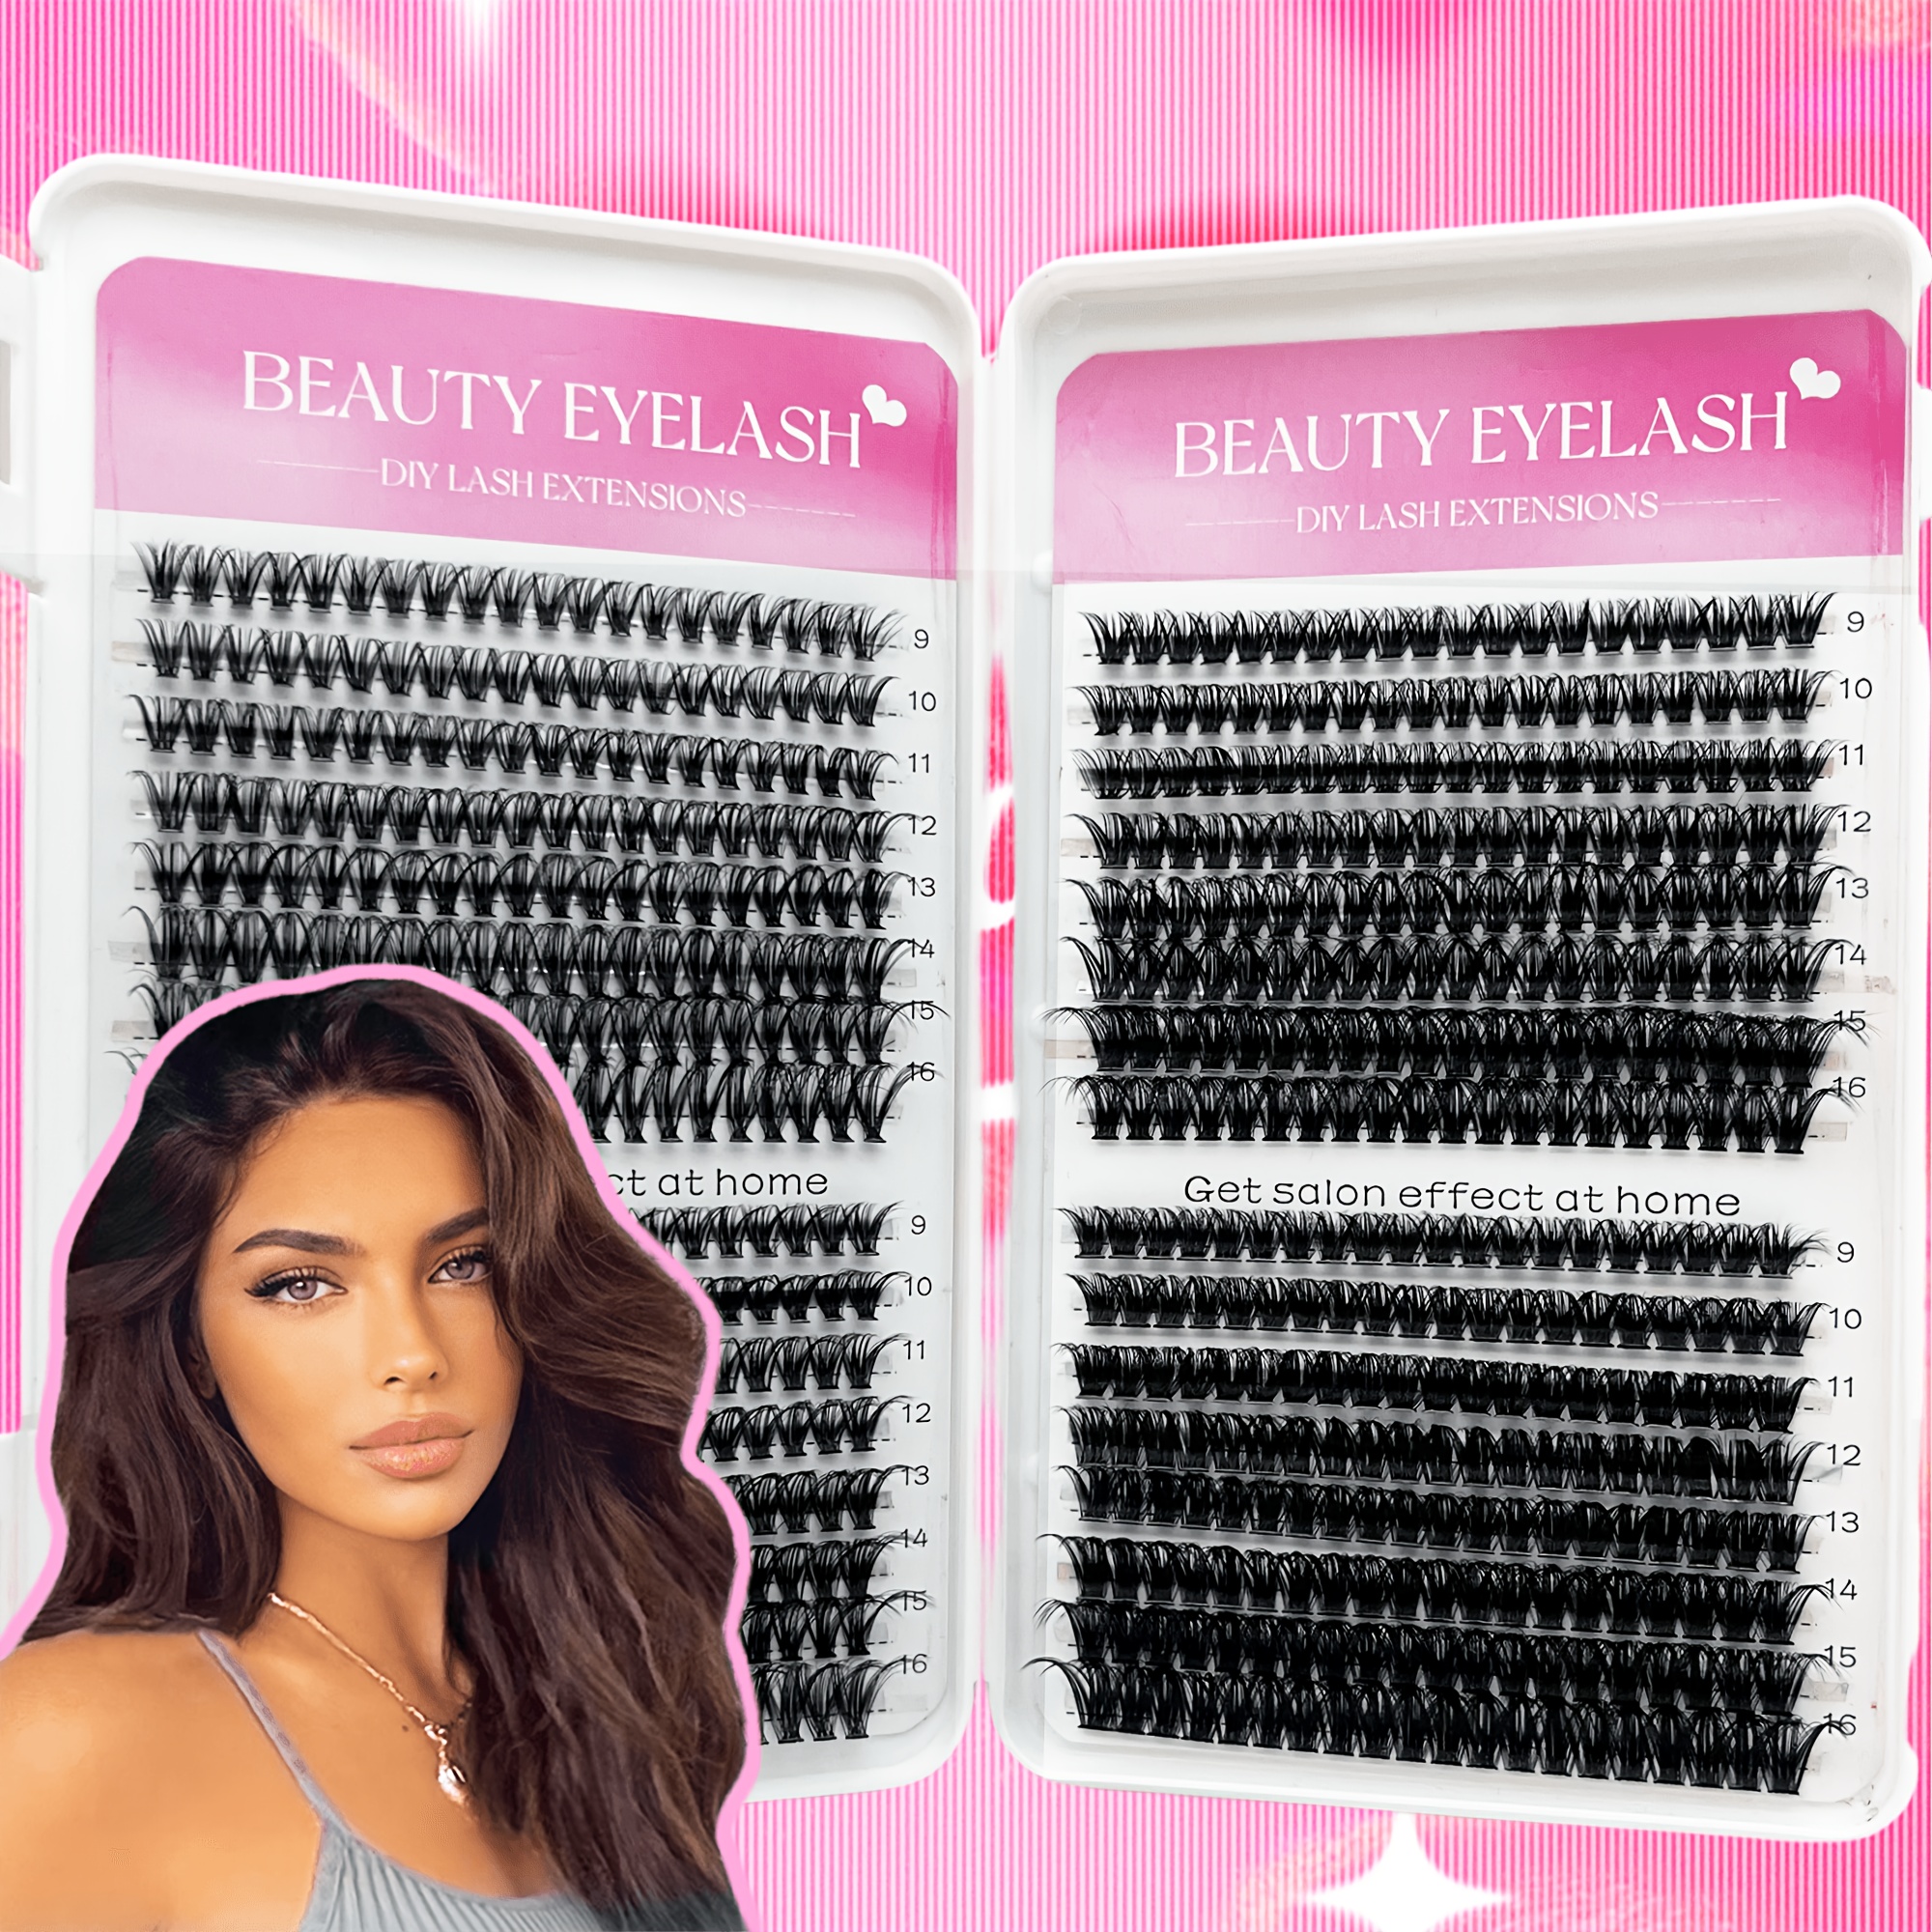 

Diy Lash Extensions, Beauty Eyelash 32 Rows, Mixed Sizes 9-16mm, Natural & Voluminous Look, Easy-to-apply Clusters For Beginners, Waterproof Lash Book With Convenient Carry Design